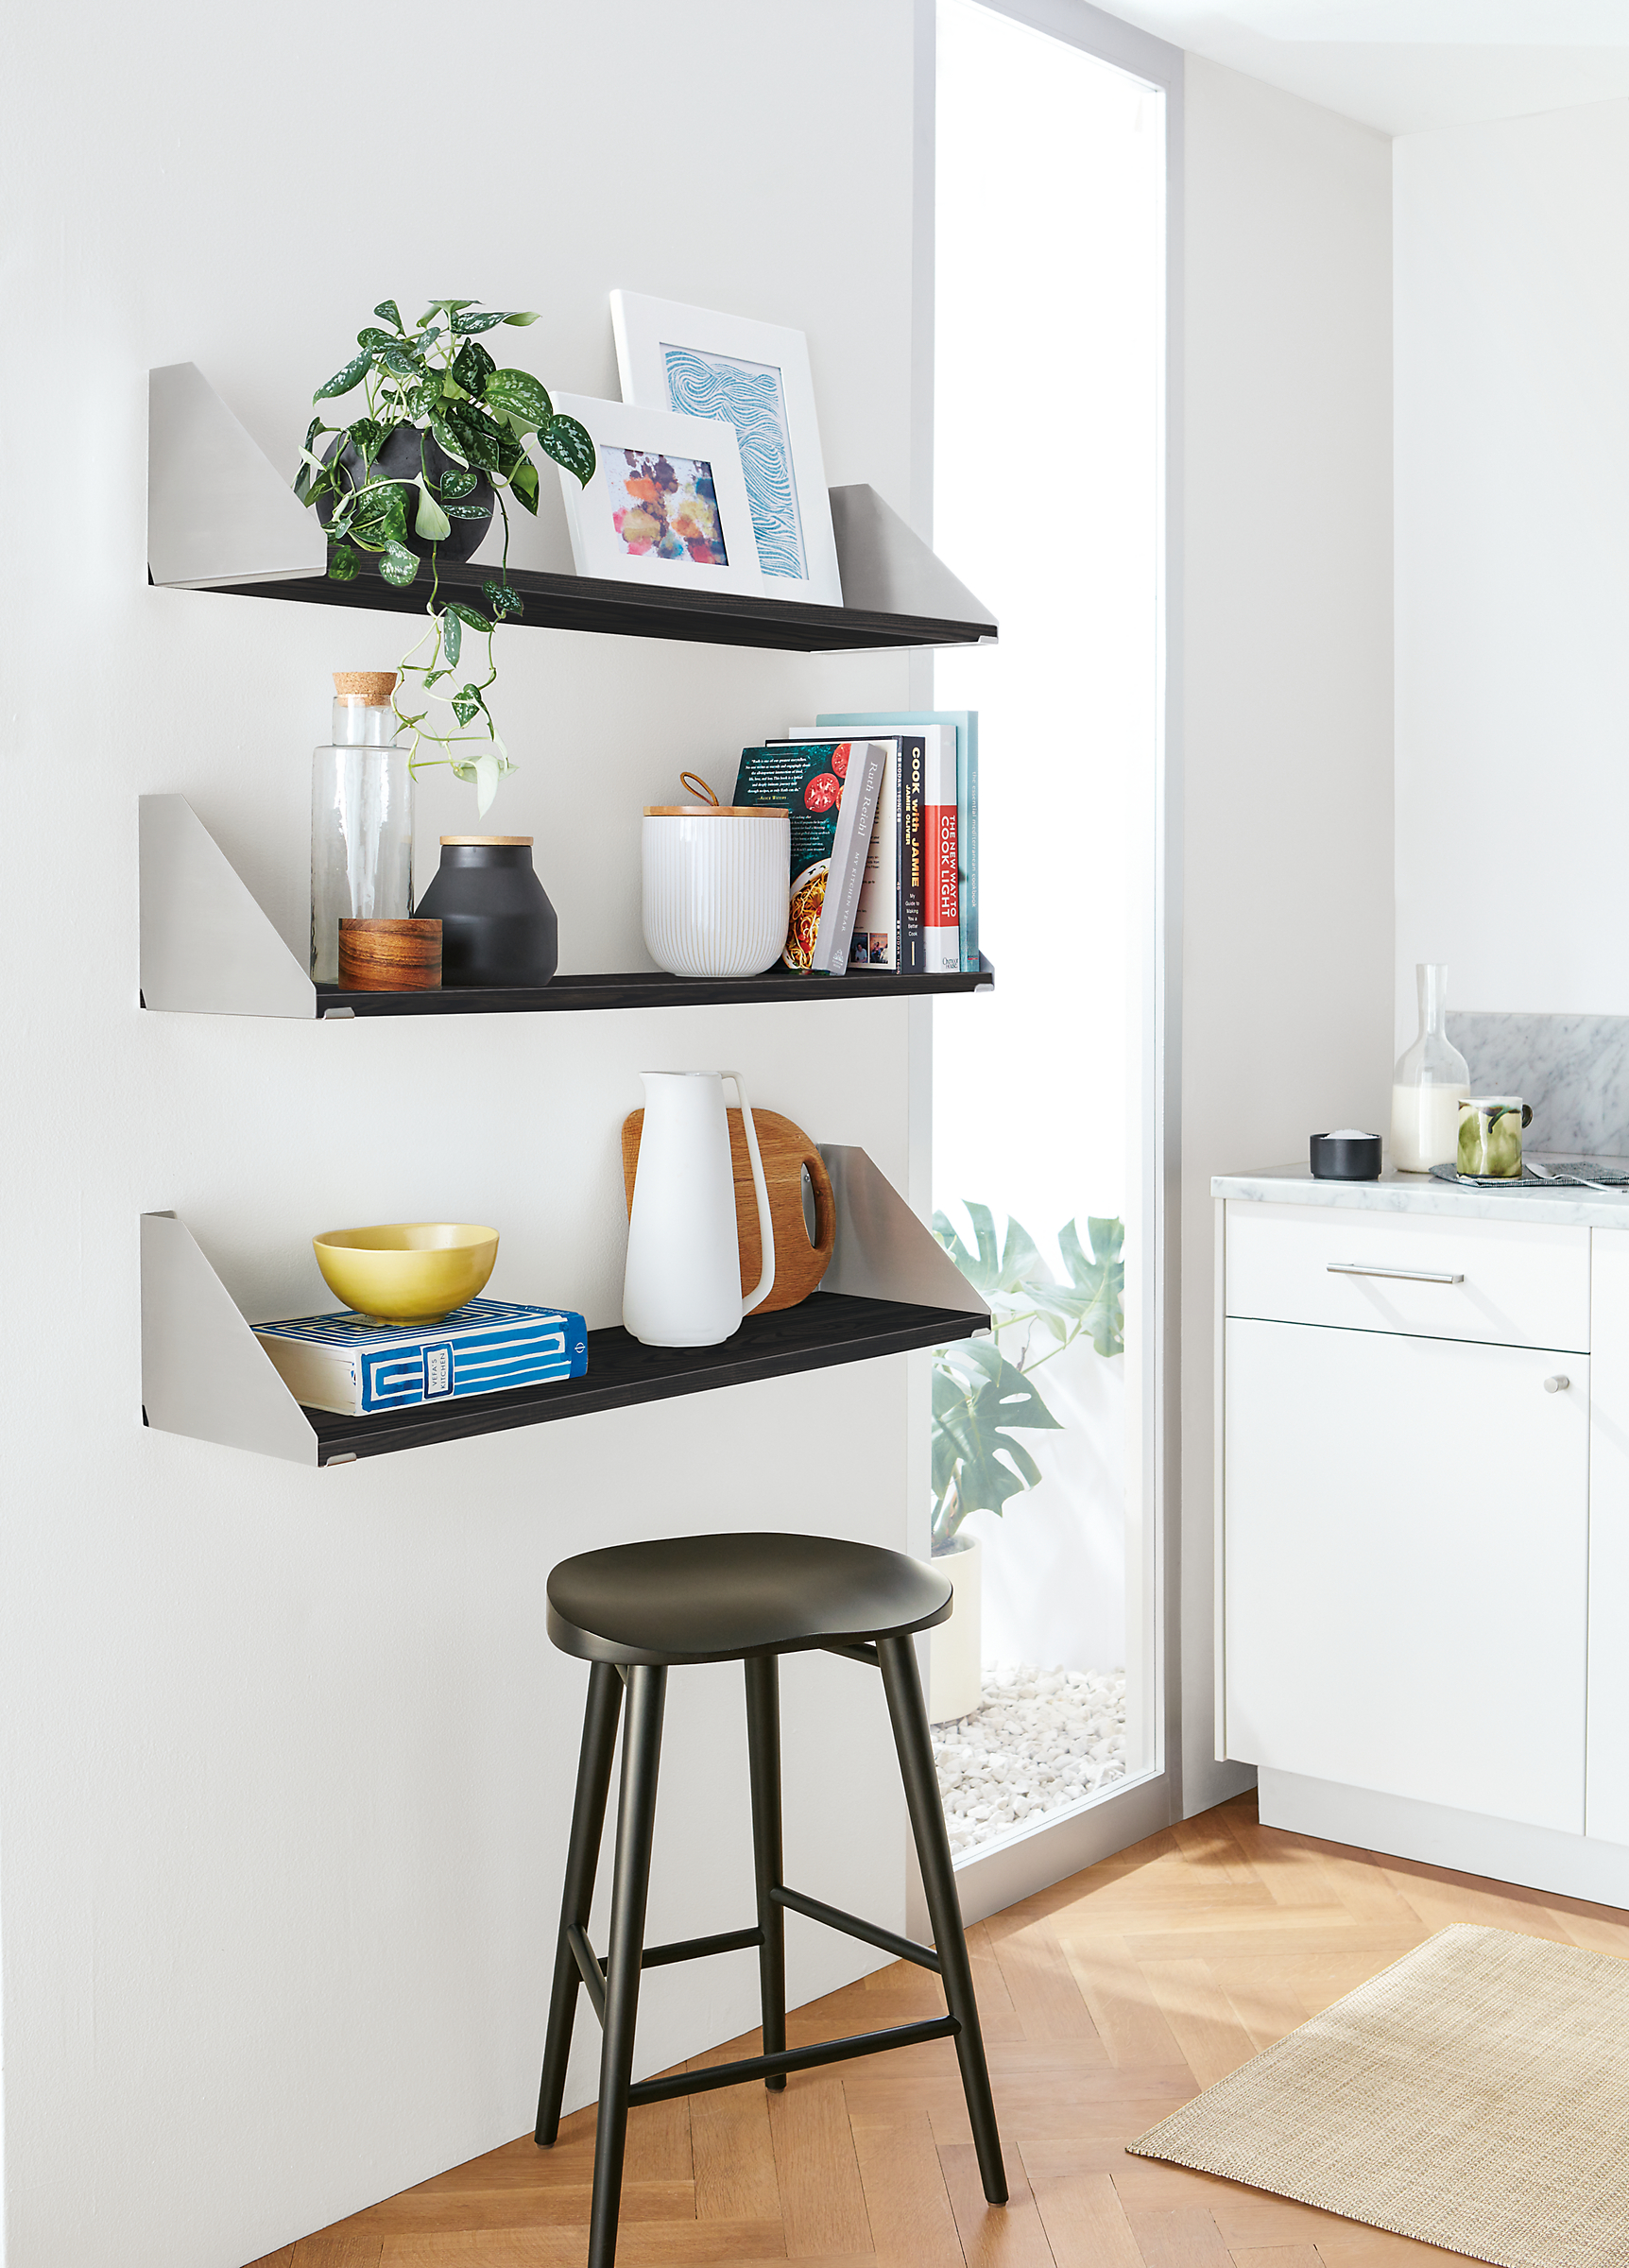 three bradley wall shelves in stainless steel holding frames, books and kitchen objects.